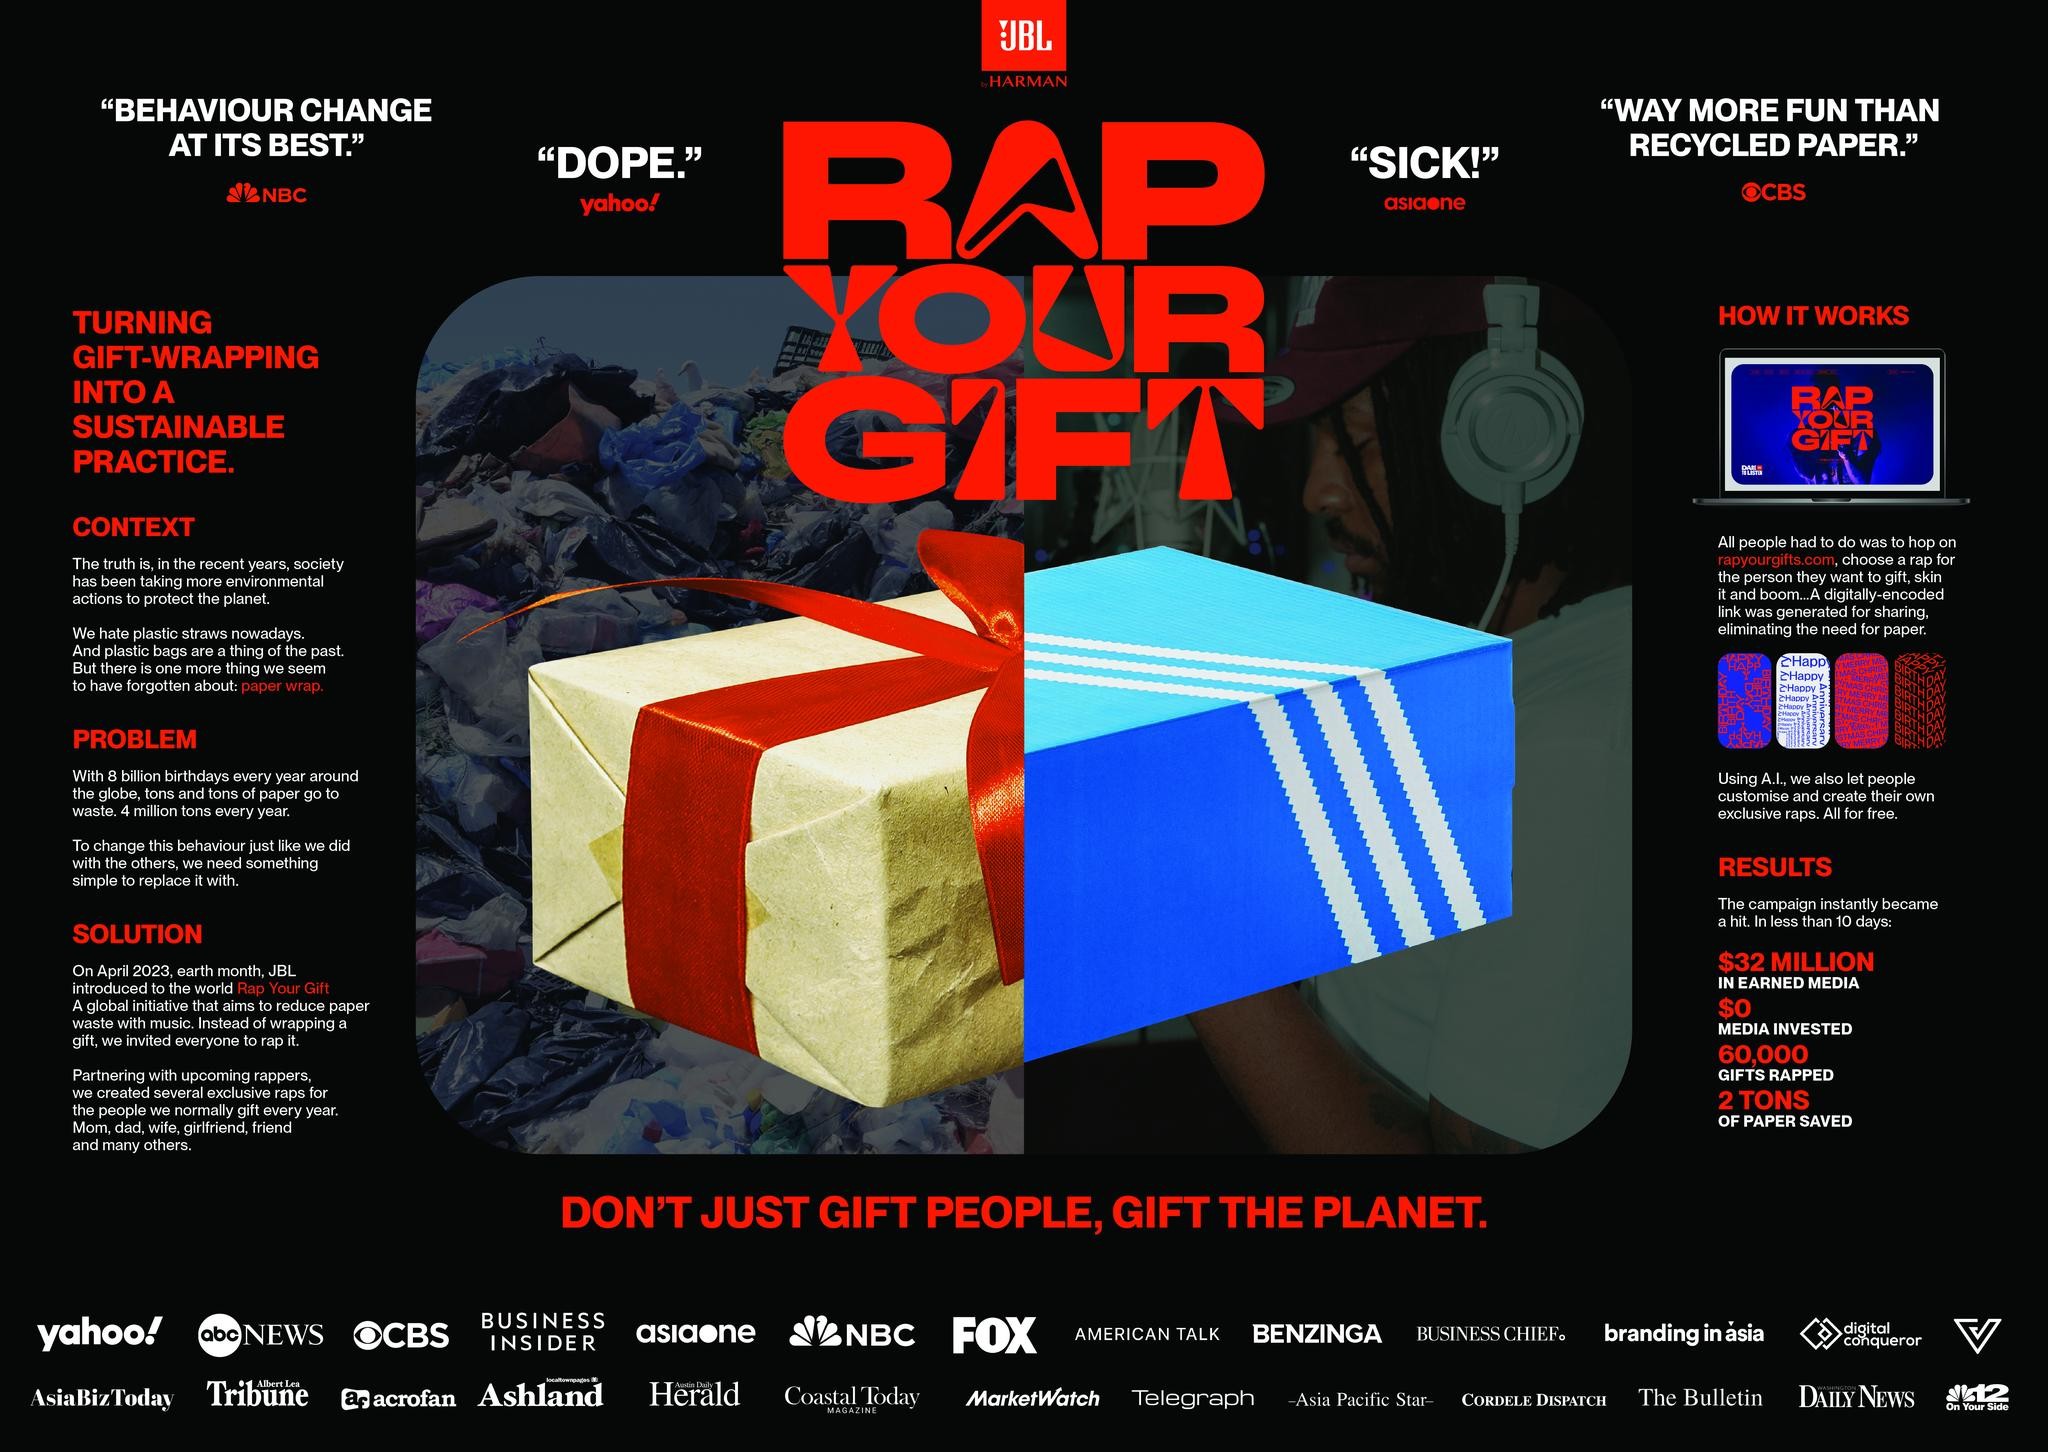 RAP YOUR GIFT